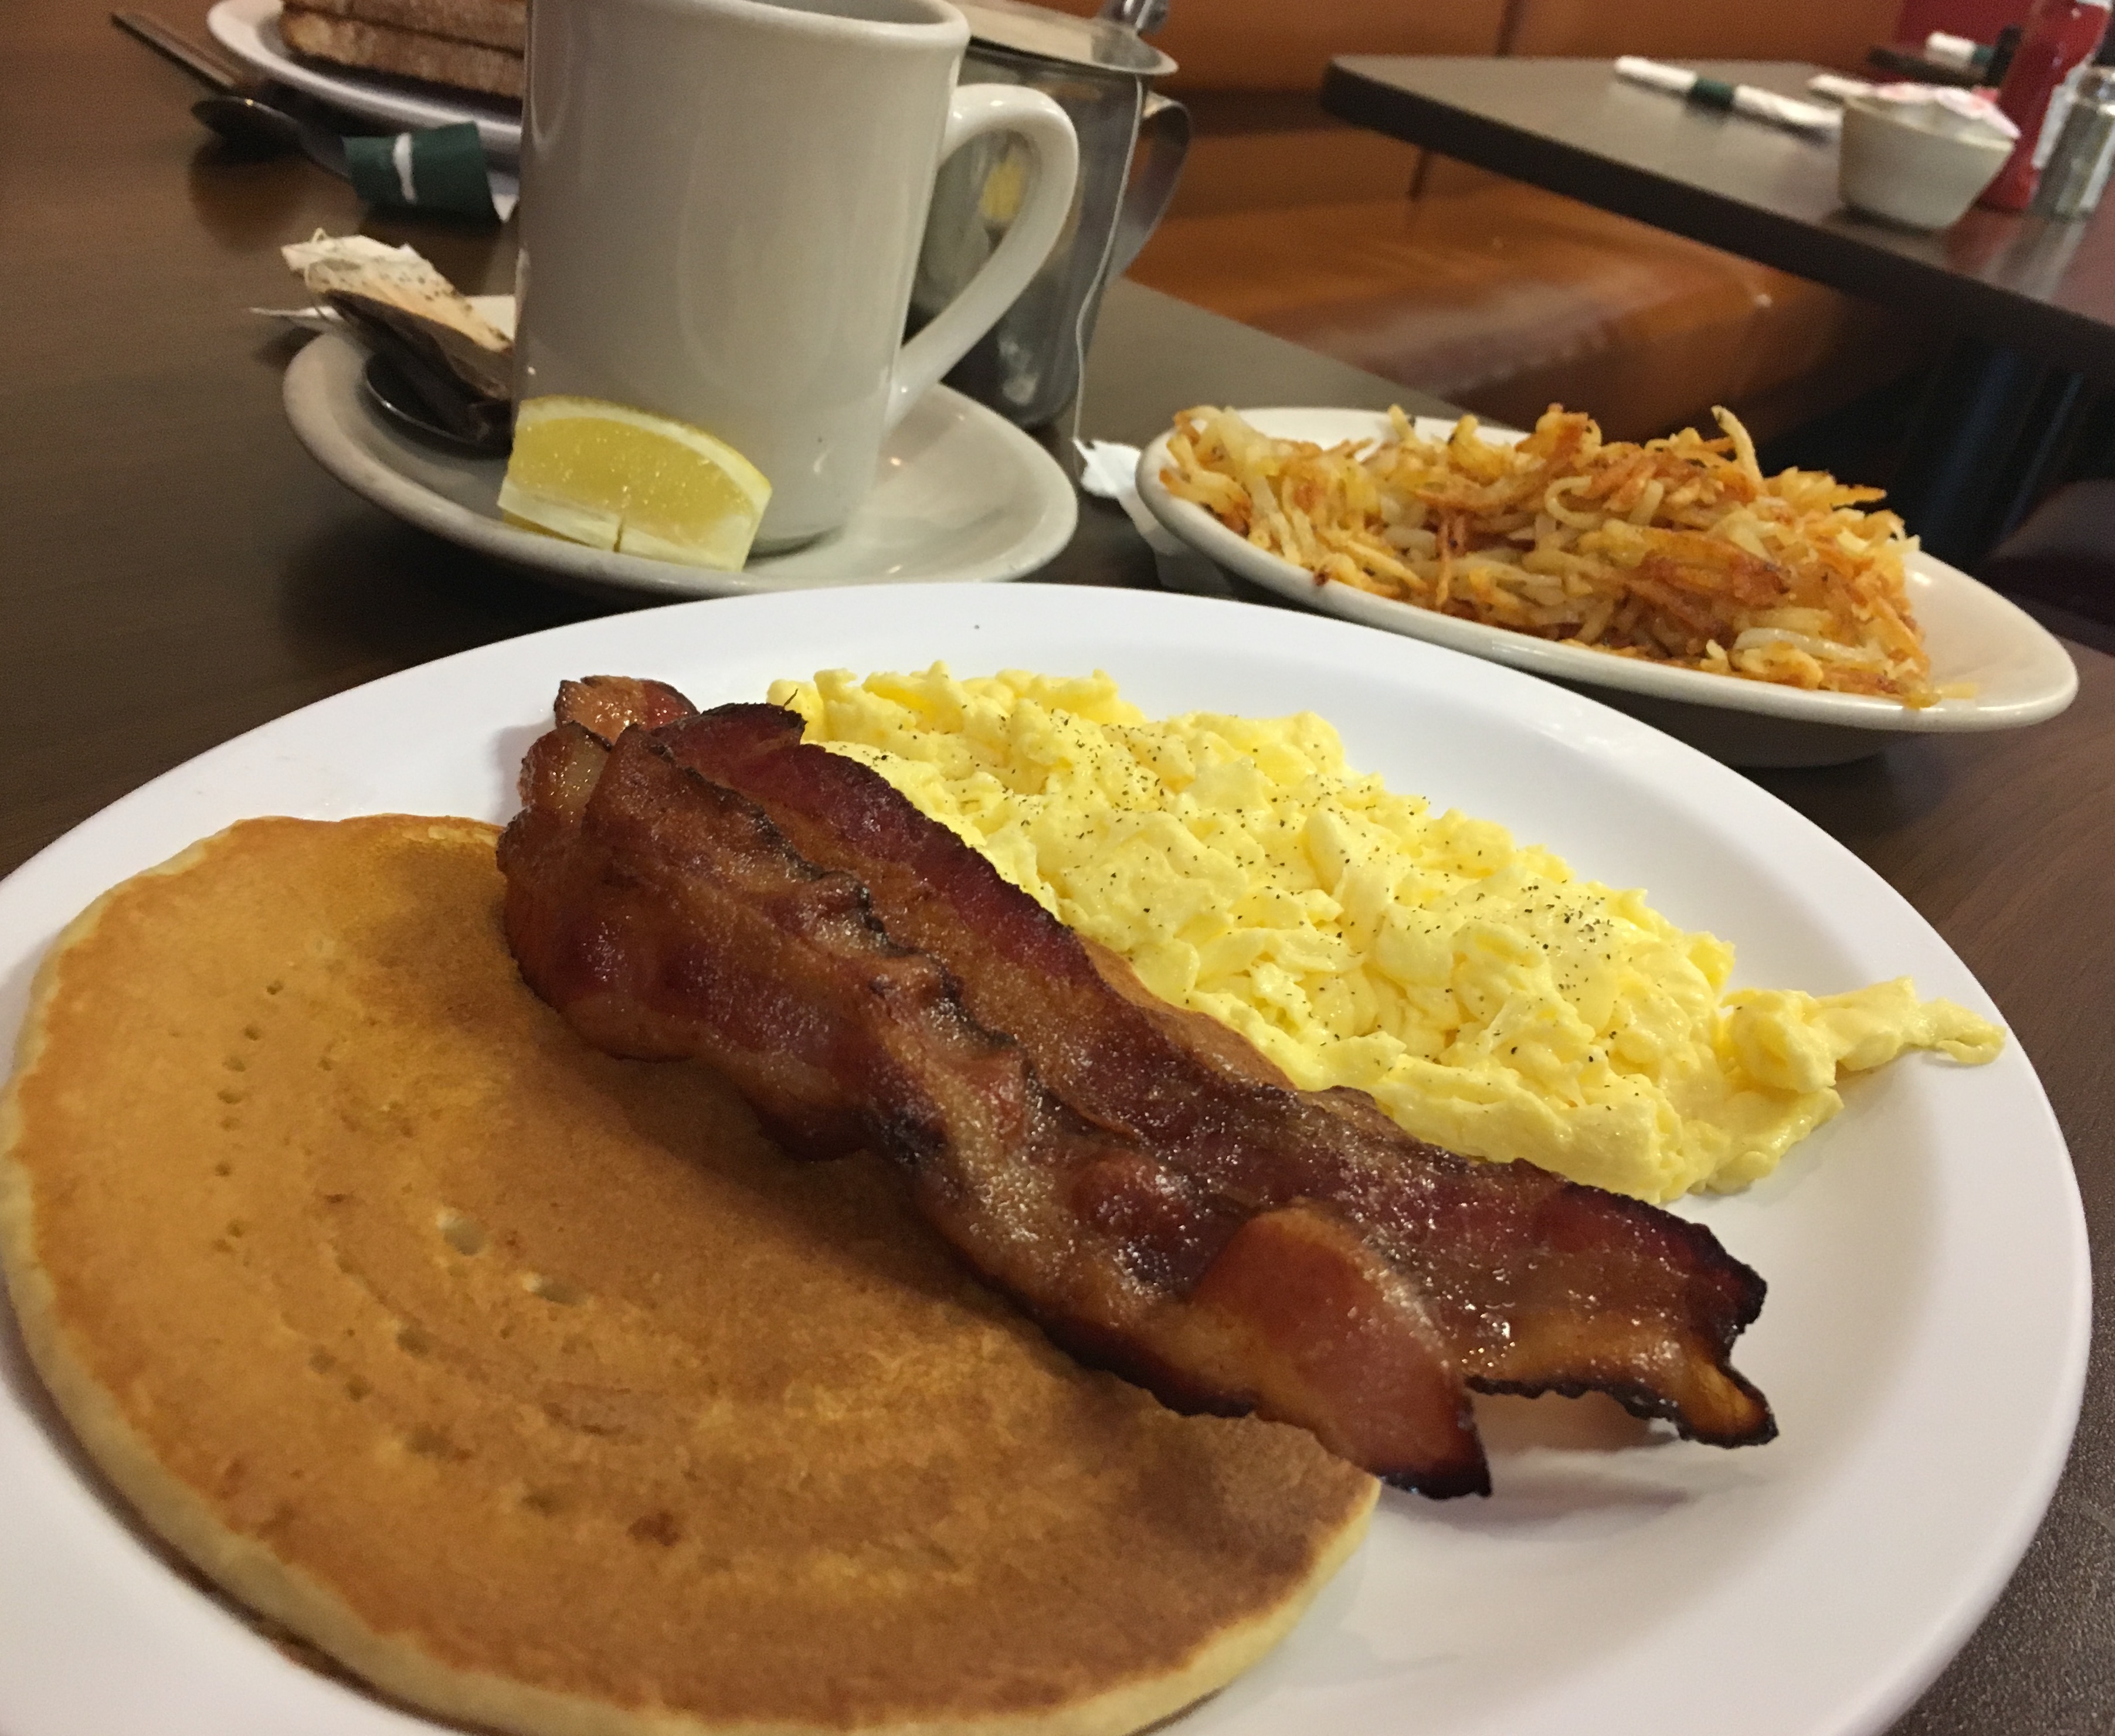 Eatery: Northeast Ohio's best breakfasts - cleveland.com